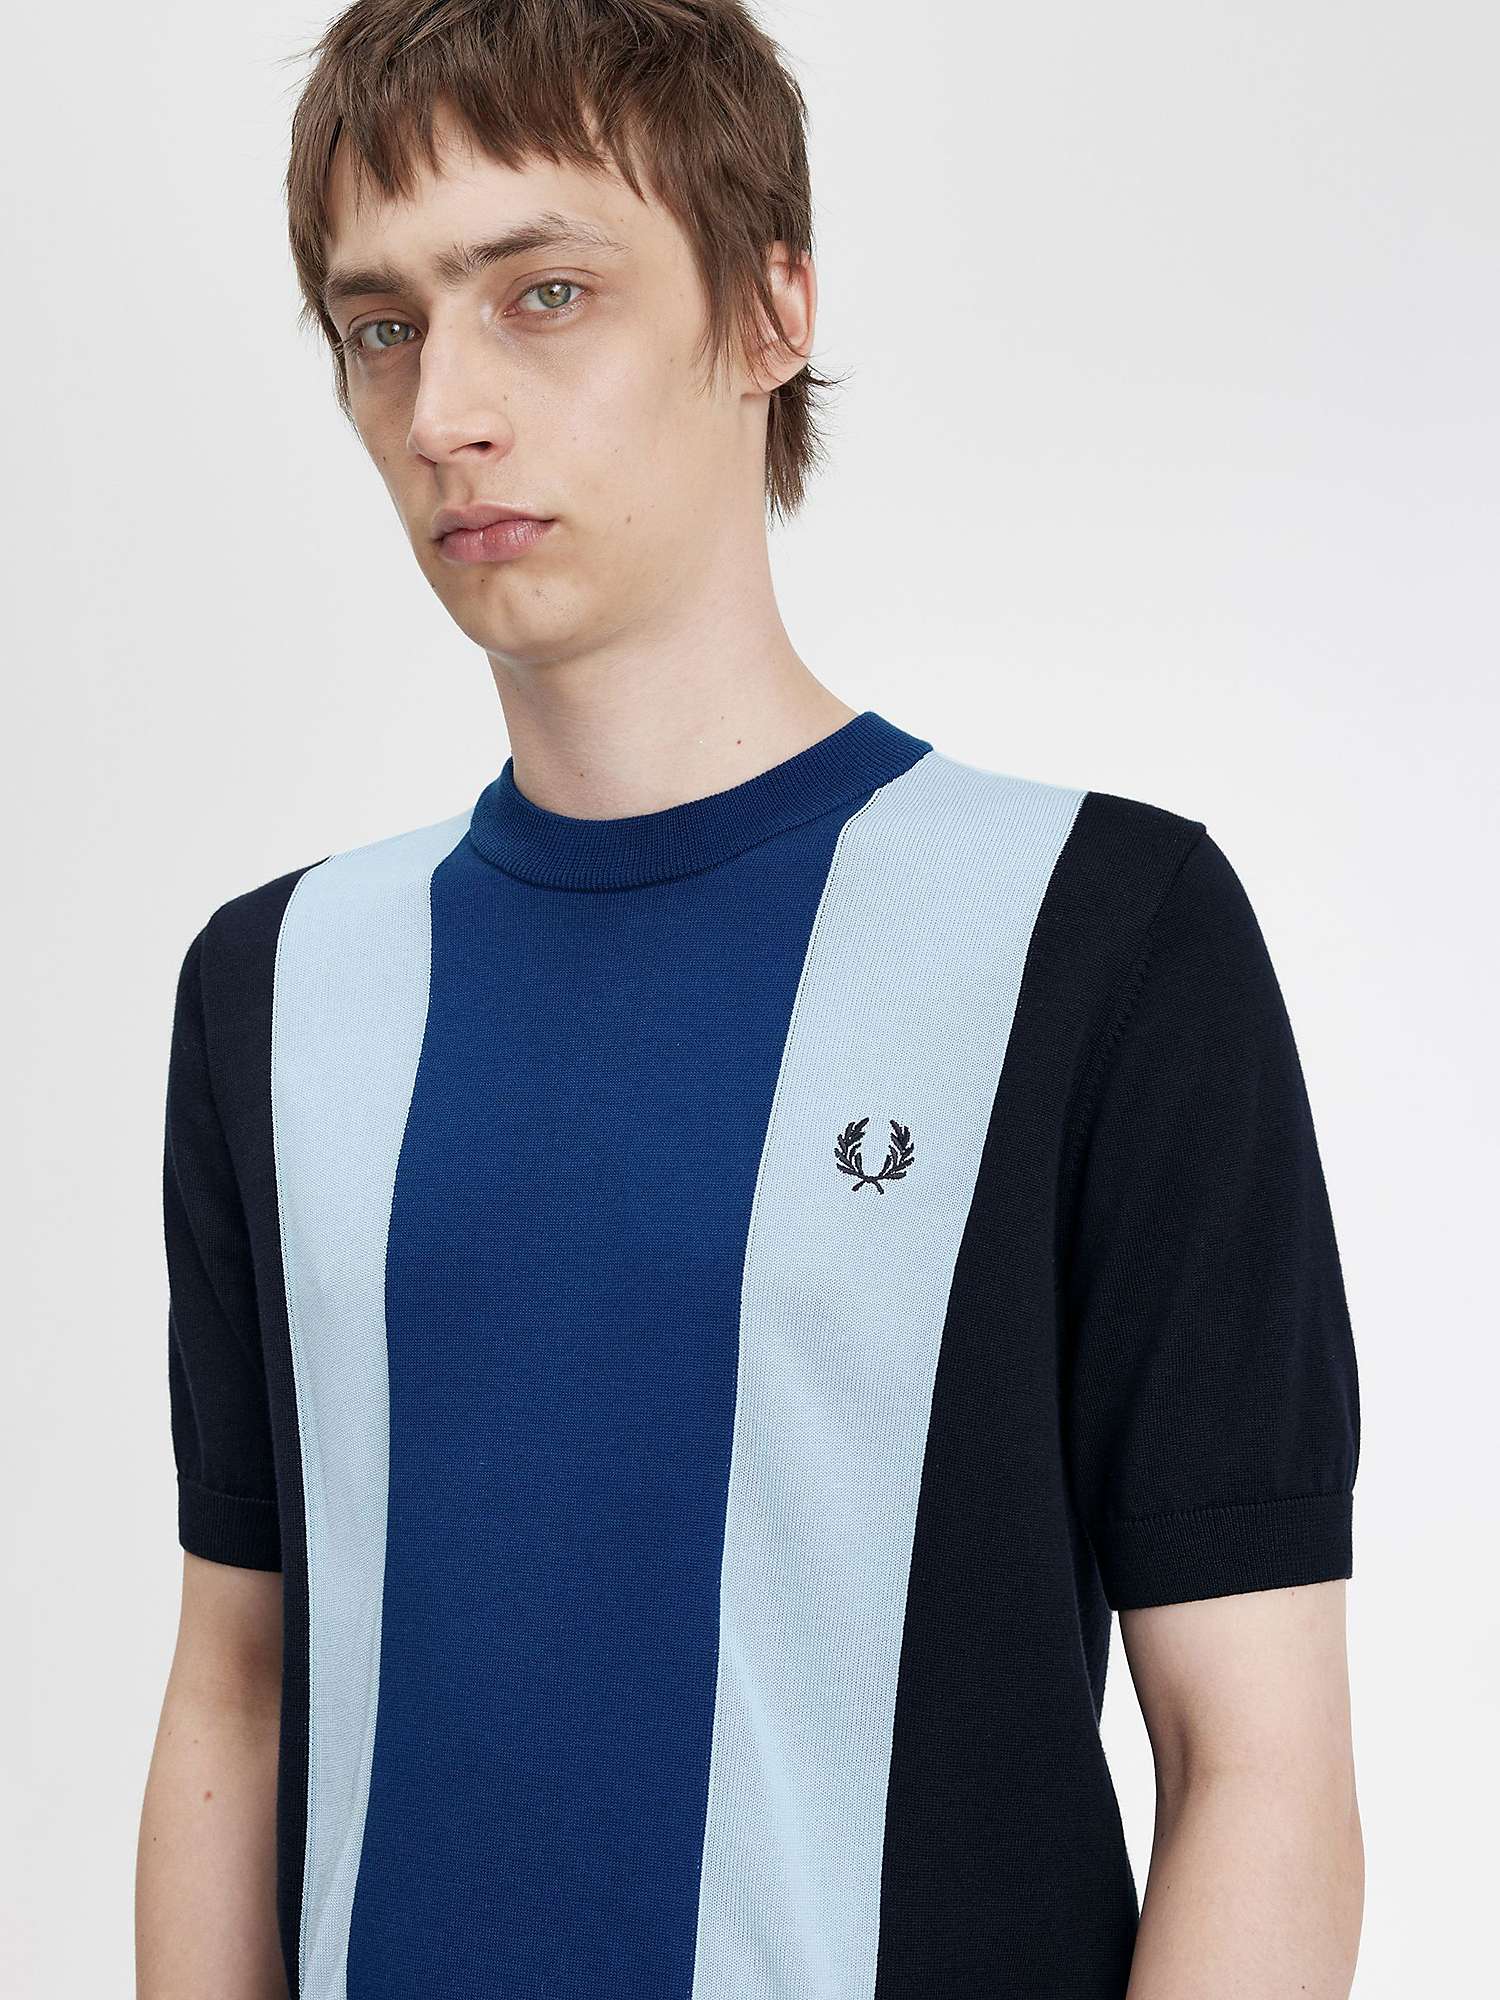 Buy Fred Perry Short Sleeve T-Shirt, Navy/Multi Online at johnlewis.com